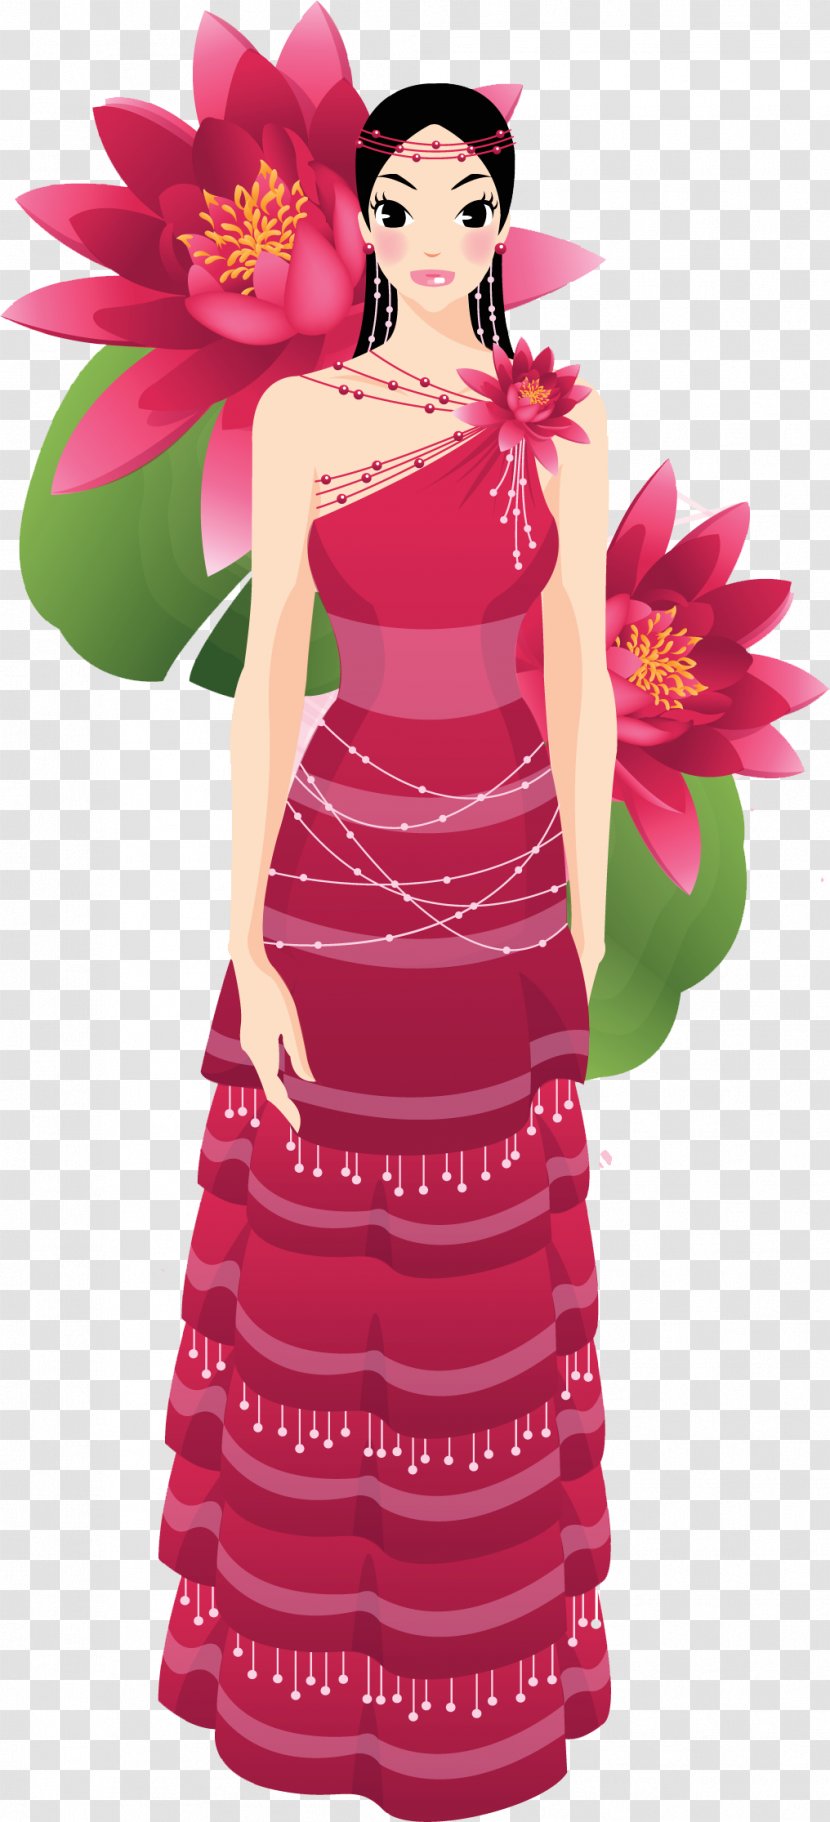 Lotus - Doll - Mythical Creature Transparent PNG